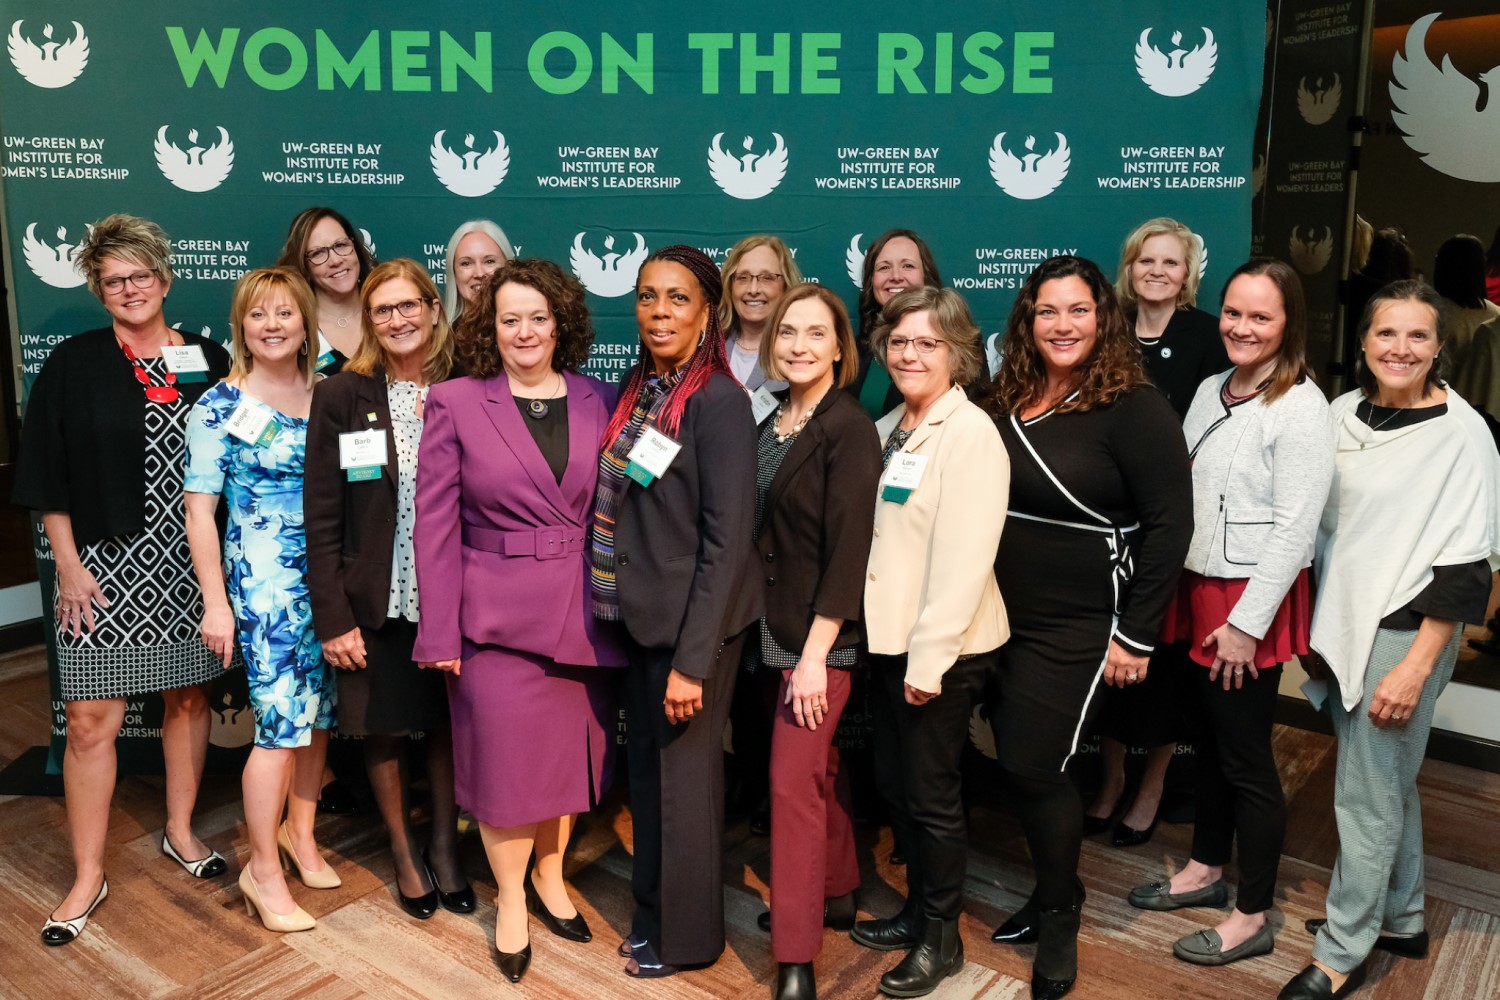 advisory board poses in front of women on the rise background